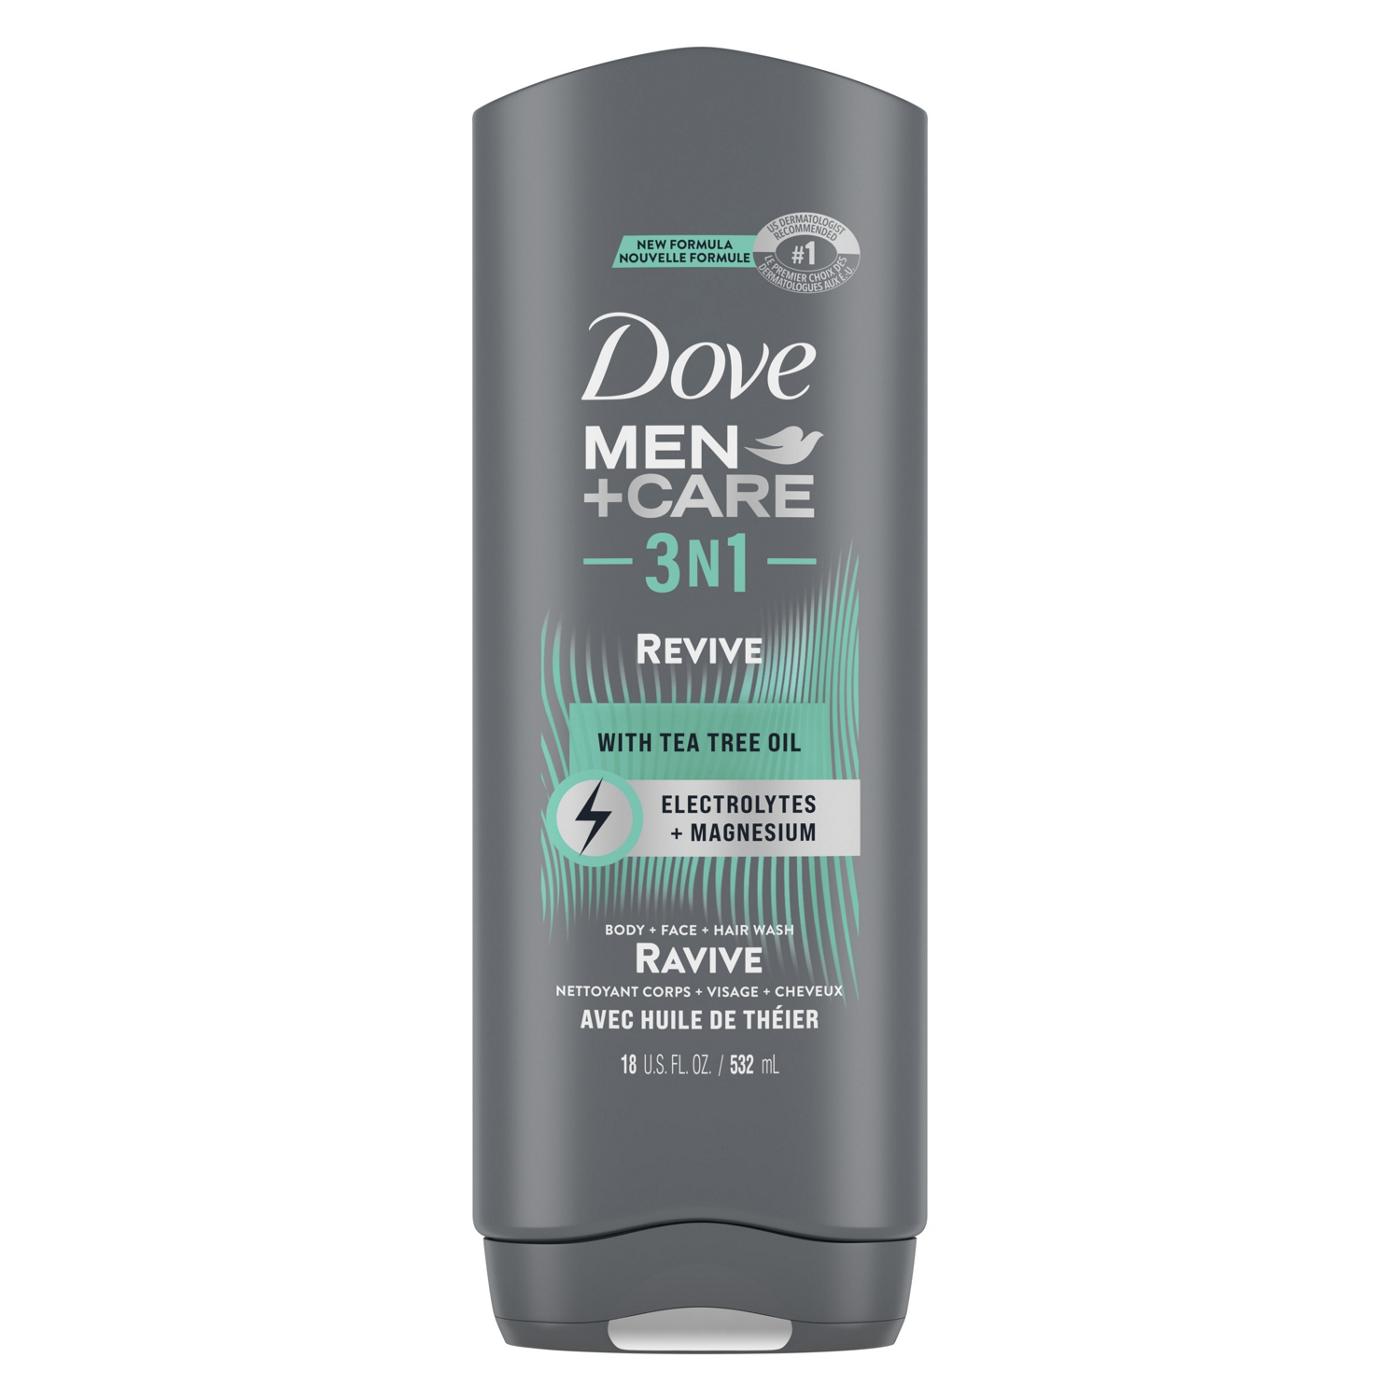 Dove Men+Care Revive 3 in 1 Wash with Tea Tree Oil; image 1 of 3